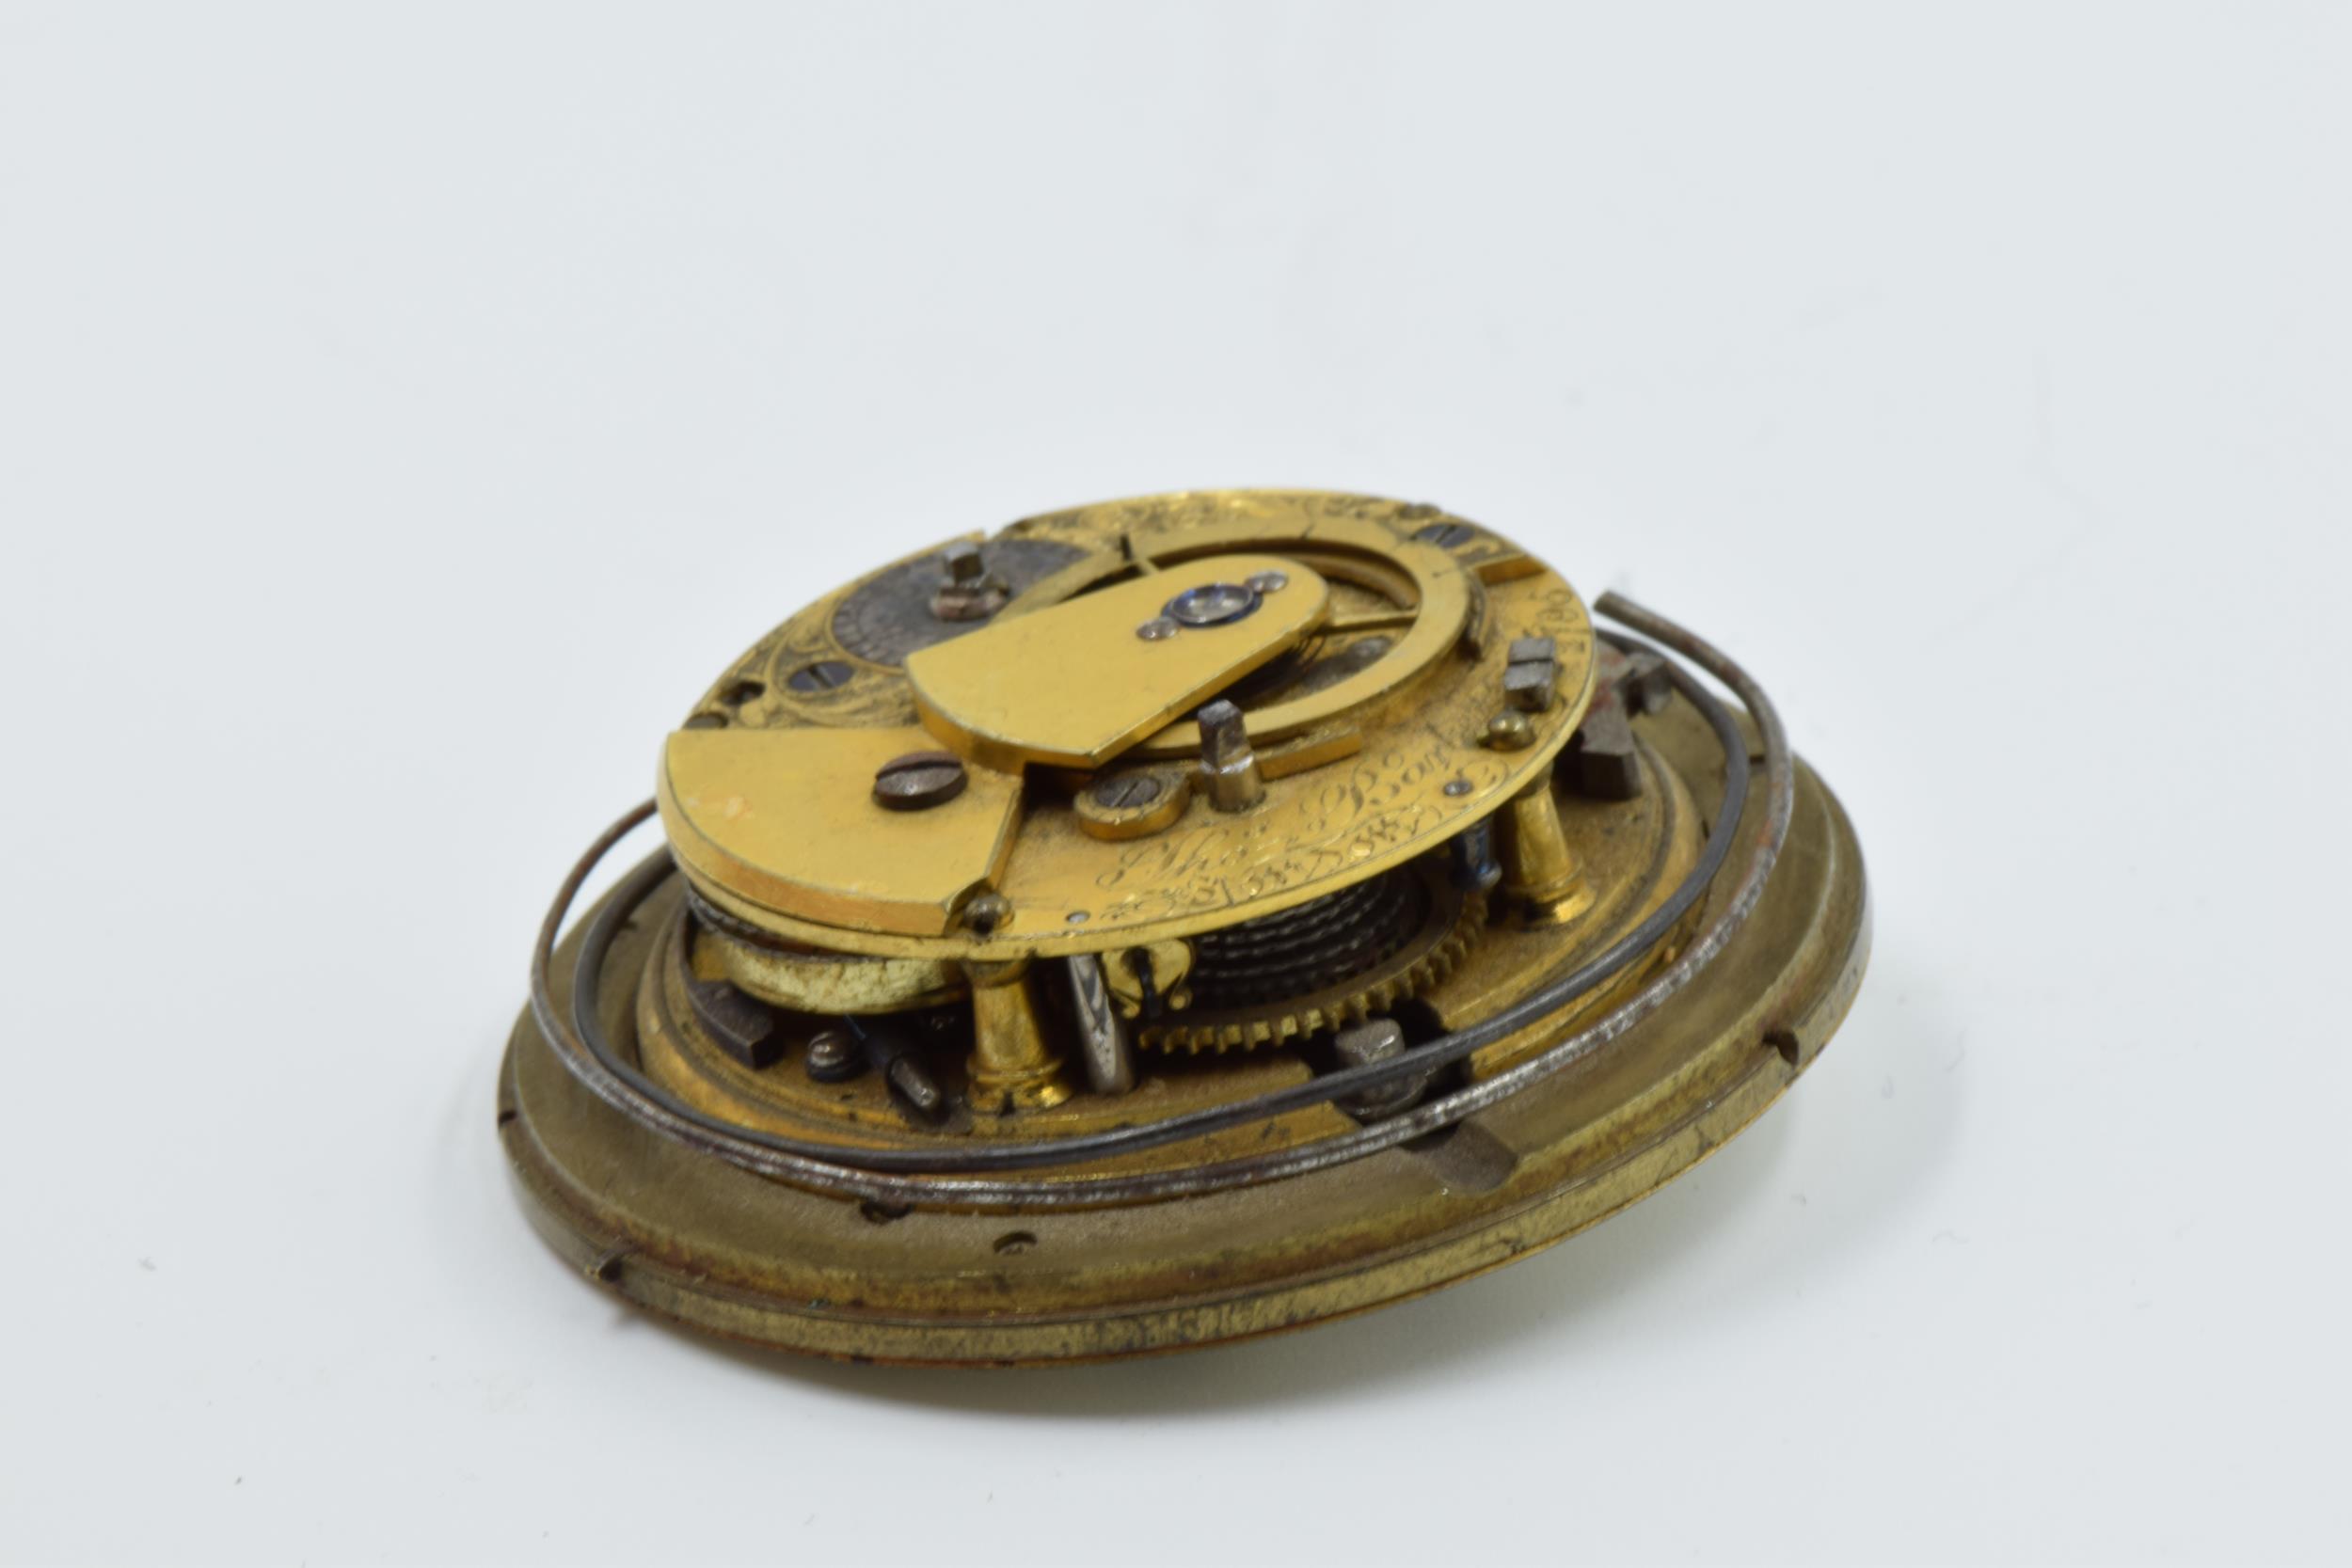 18th Century English chiming pocket watch movement by Thomas Barber, London, with 43mm enamel dial - Image 6 of 7